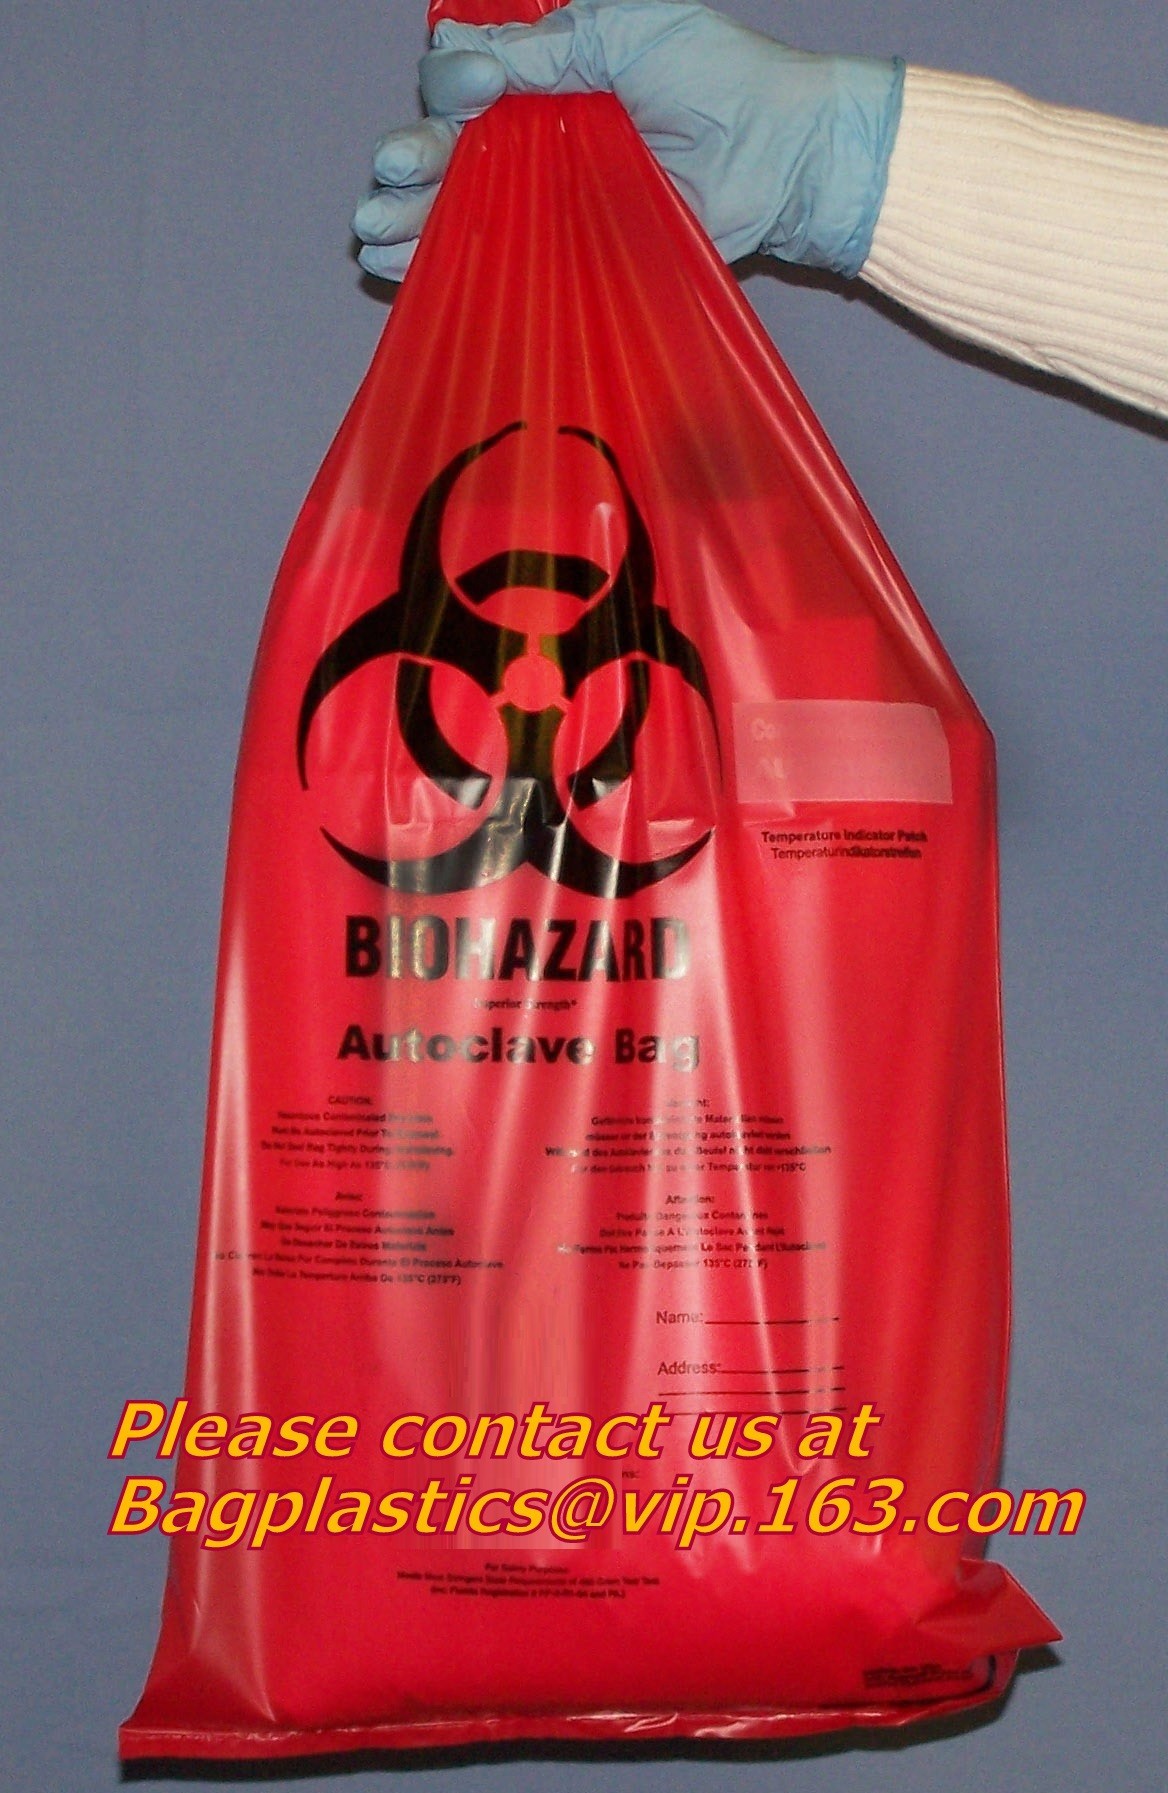 China Clinical supplies, biohazard,Specimen bags, autoclavable bags, sacks, Cytotoxic Waste Bags wholesale